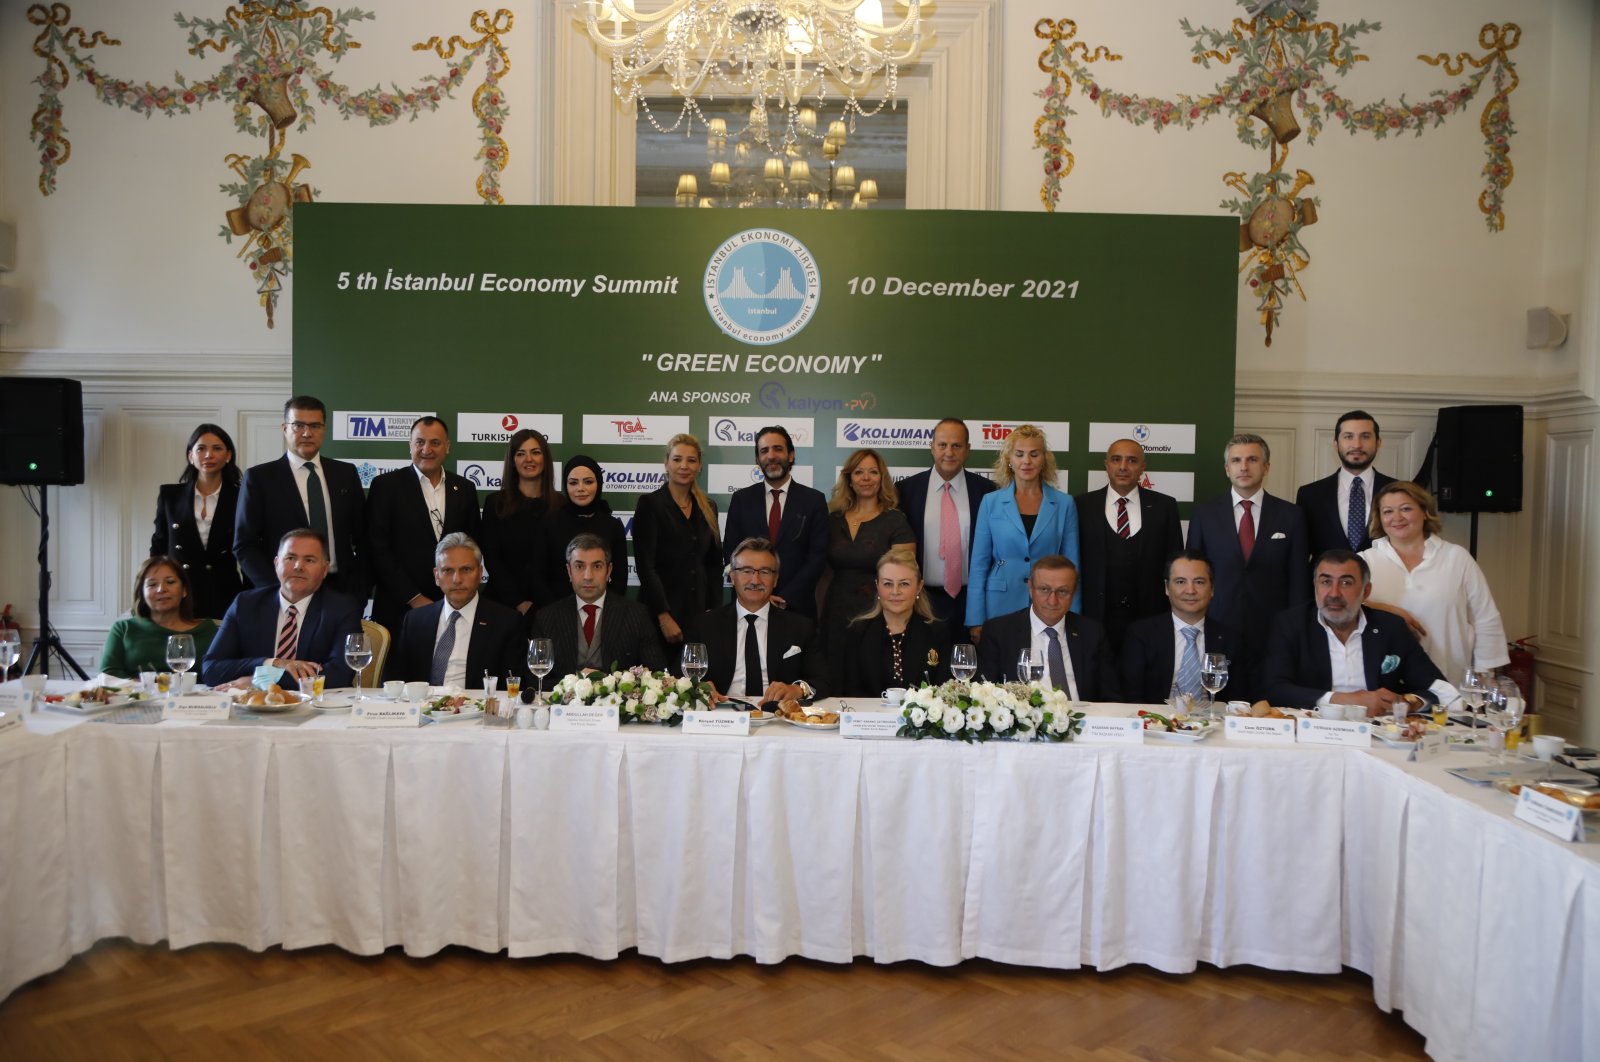 Istanbul Economy Summit Chairperson of the Board Kürşad Tüzmen and other executives pose for a photo during a press meeting in Istanbul, Turkey, Oct. 26, 2021. (Courtesy of Istanbul Economy Summit)